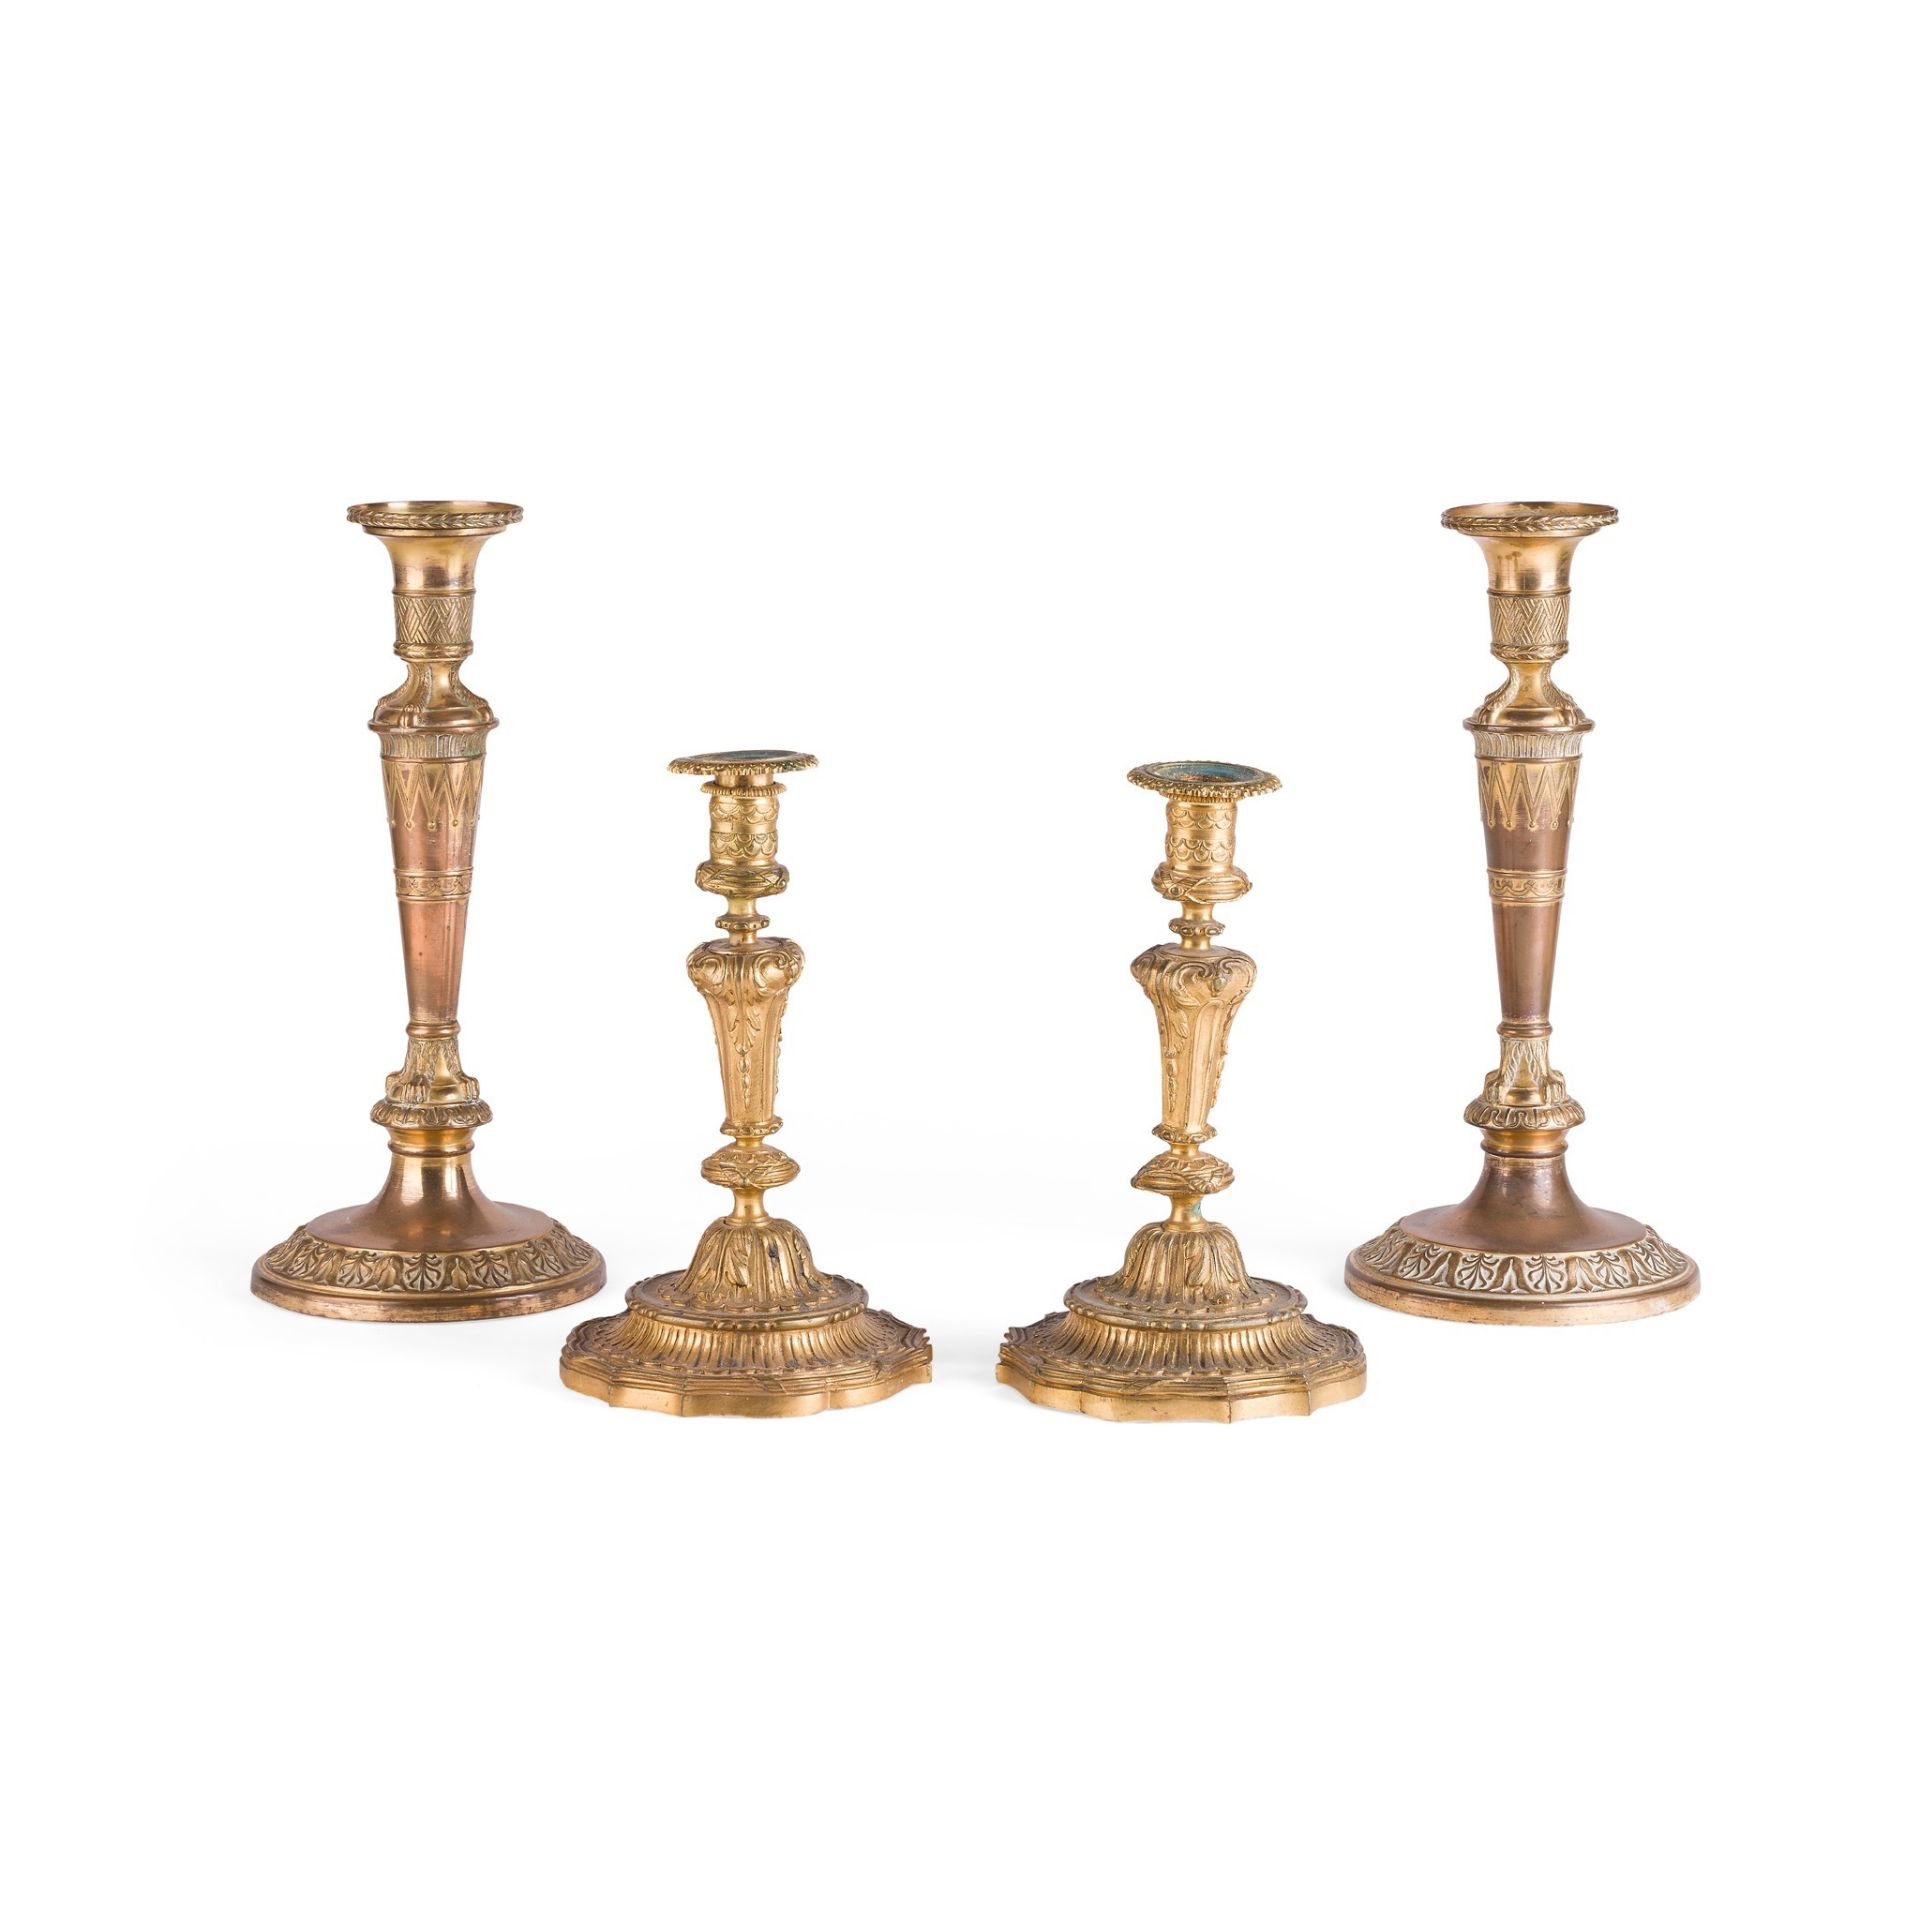 PAIR OF GEORGE III GILT COPPER CANDLESTICKS LATE 18TH/EARLY 19TH CENTURY